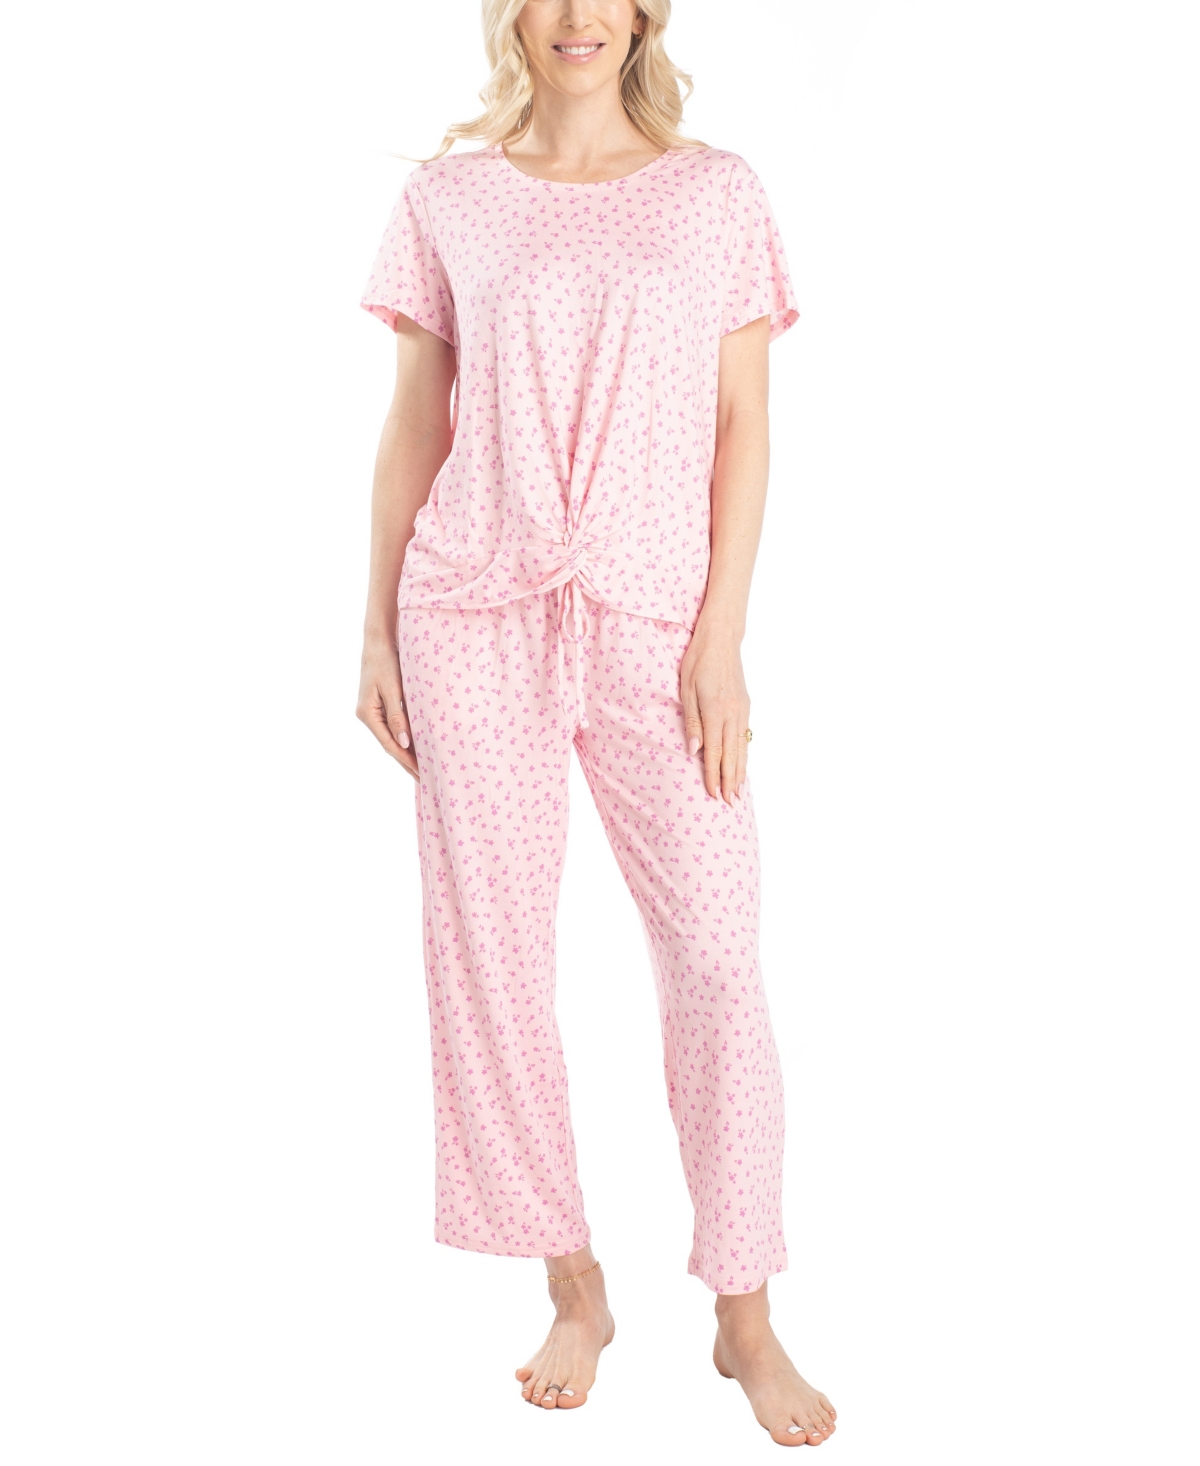 Women's Lounge Connection Pj Set - Navy squiggles